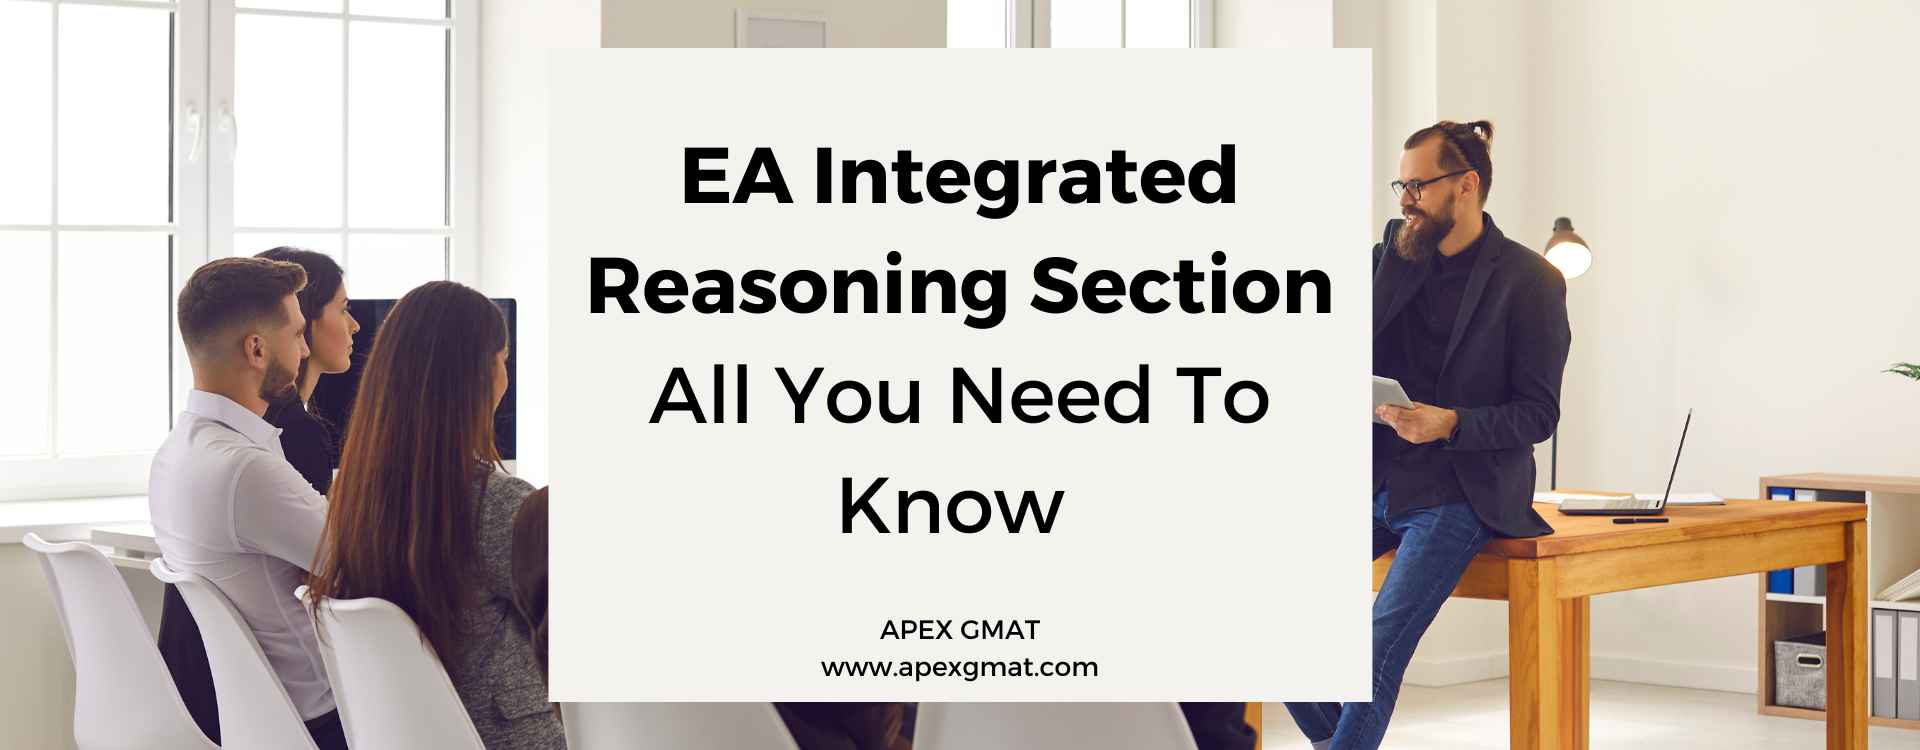 EA Integrated Reasoning Section – All You Need To Know